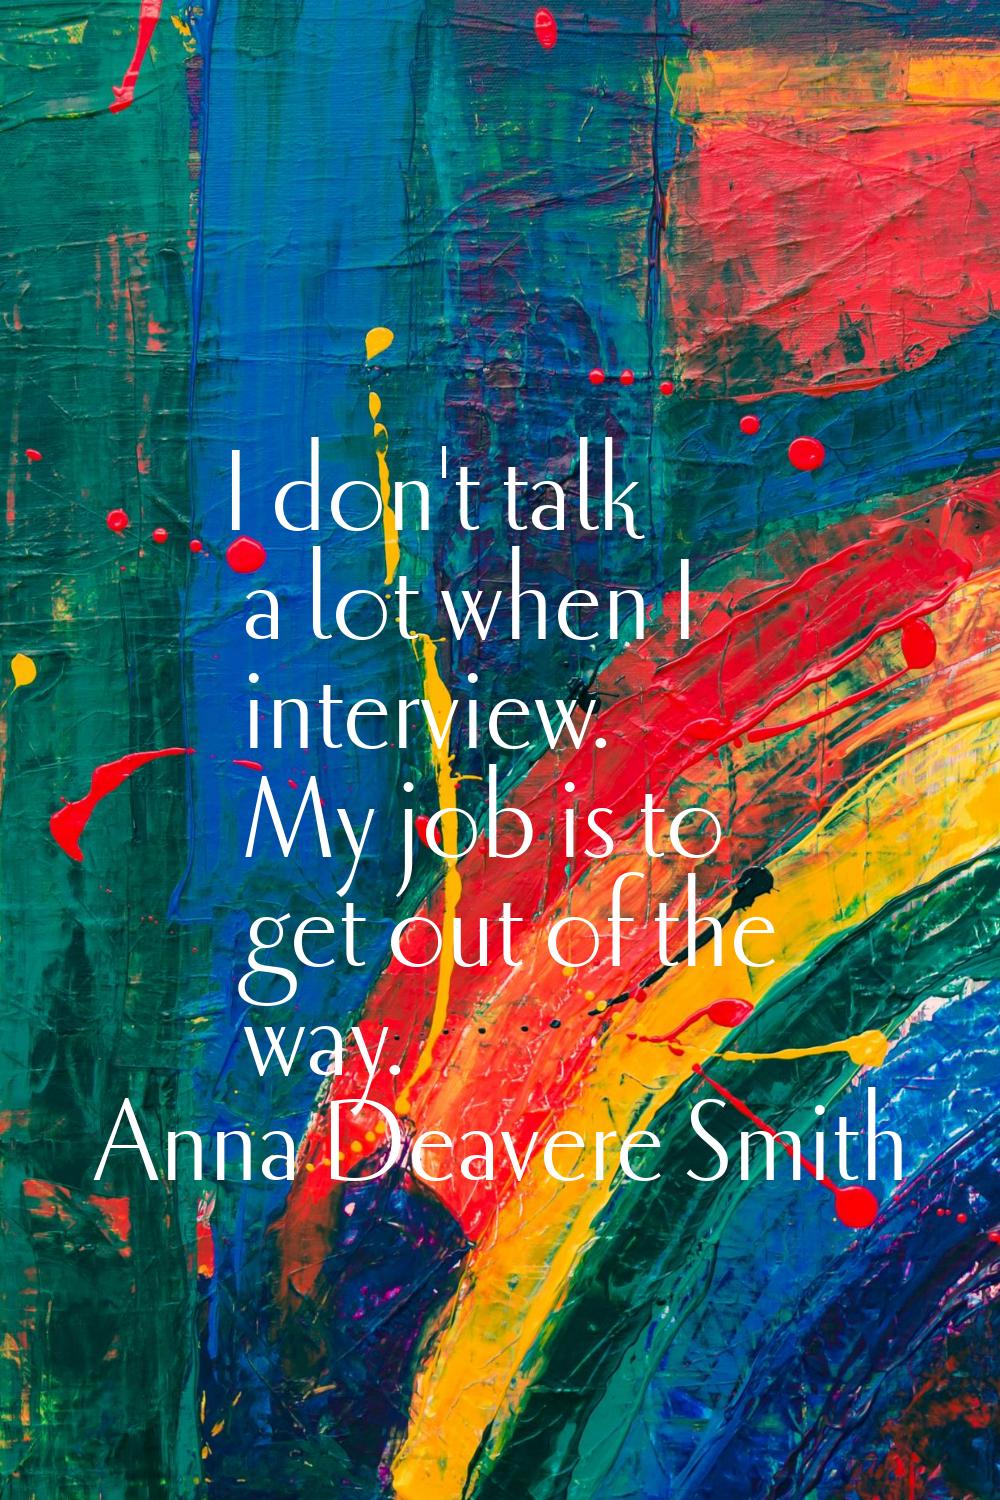 I don't talk a lot when I interview. My job is to get out of the way.